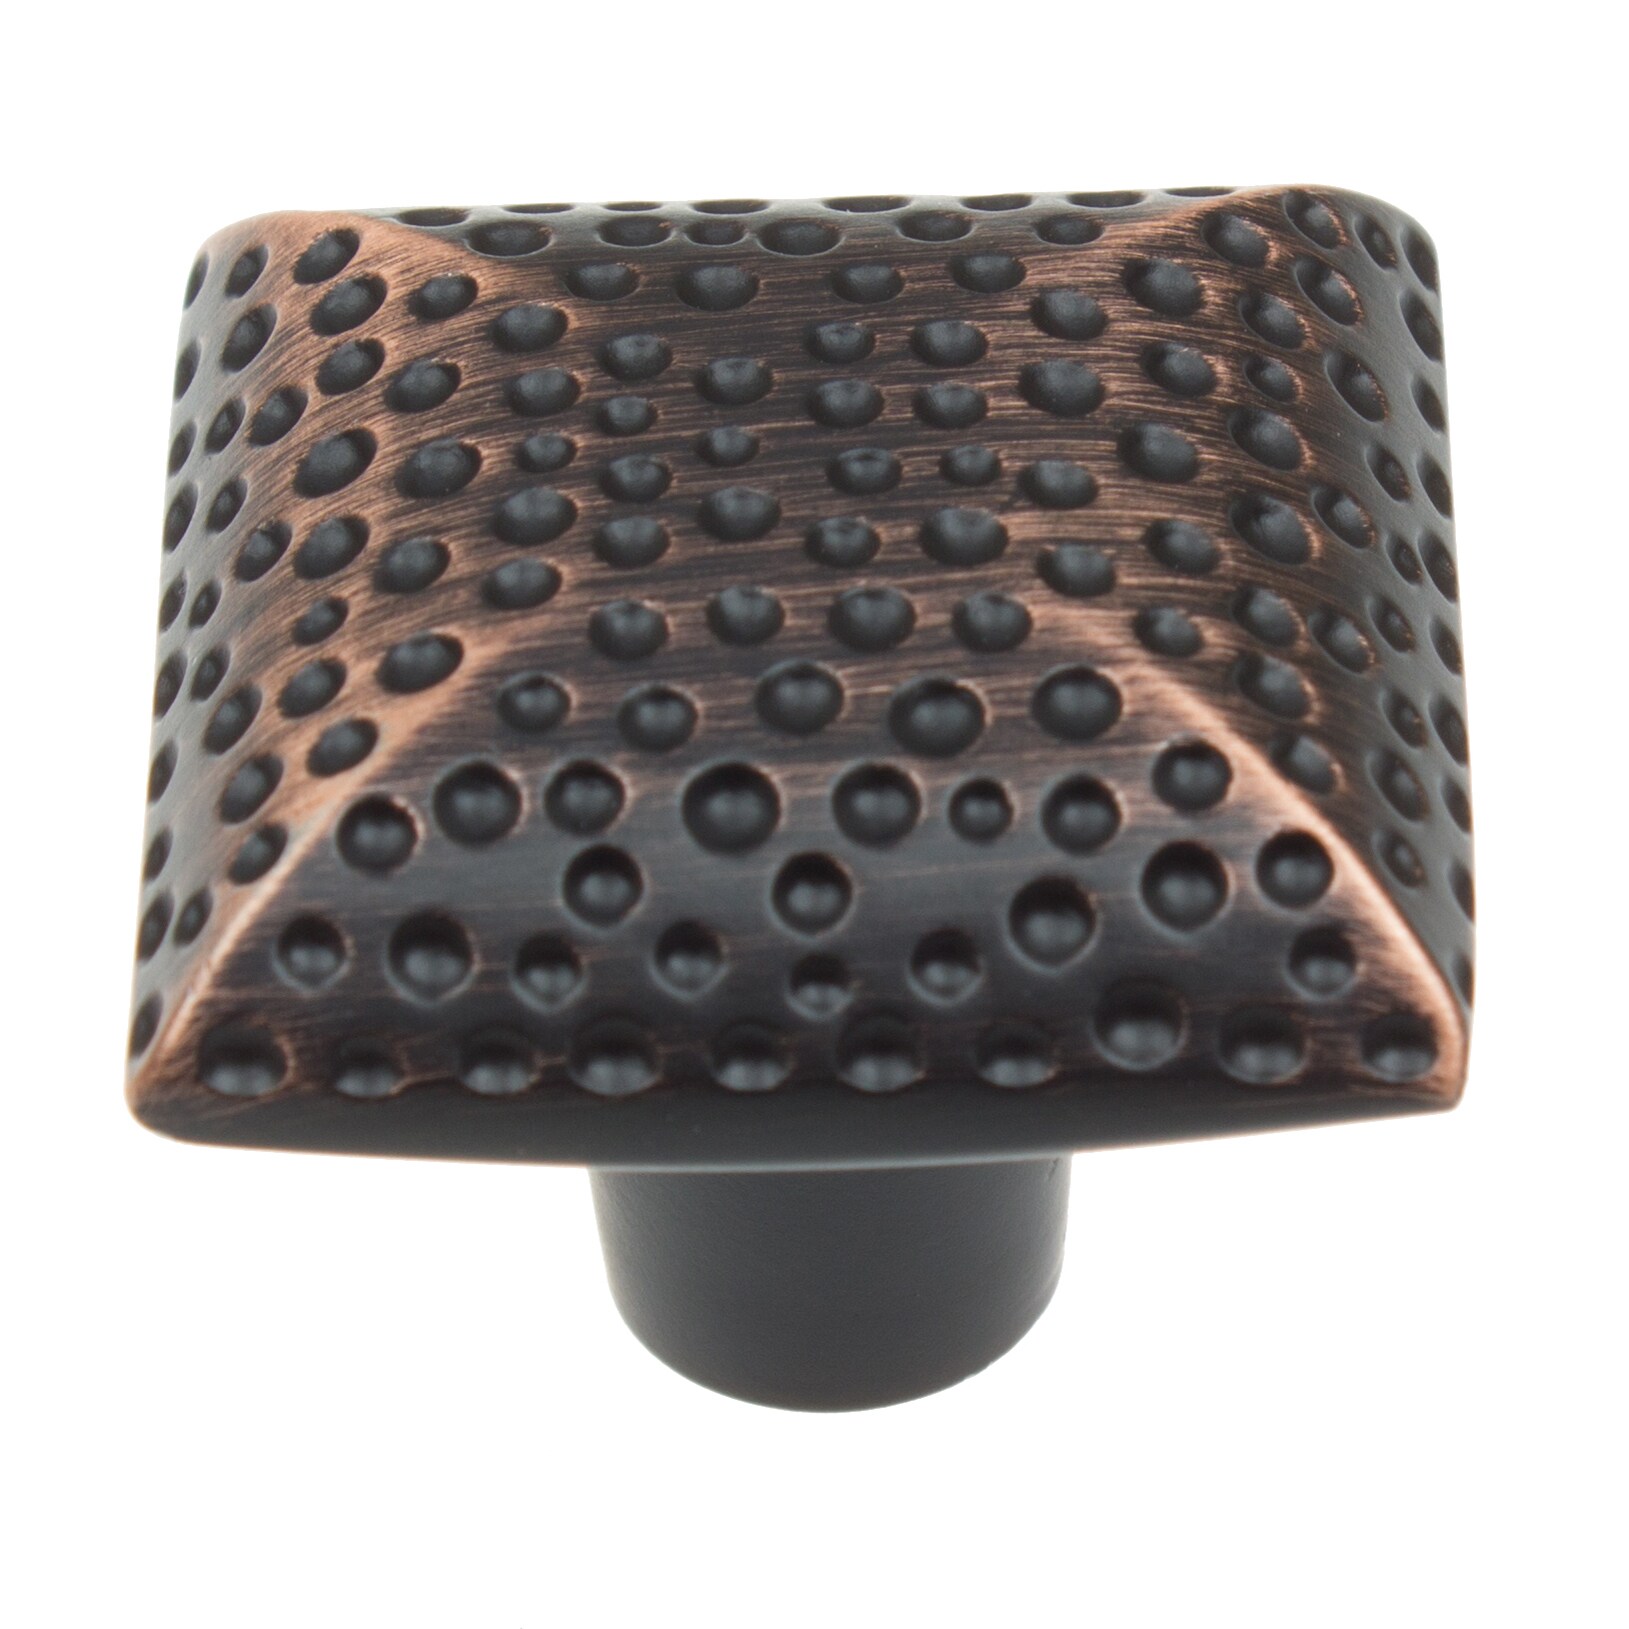 GlideRite 1-1/4 in. Dotted Hammered Transitional Square Cabinet Knobs, Oil Rubbed Bronze, Pack of 10 - image 2 of 5